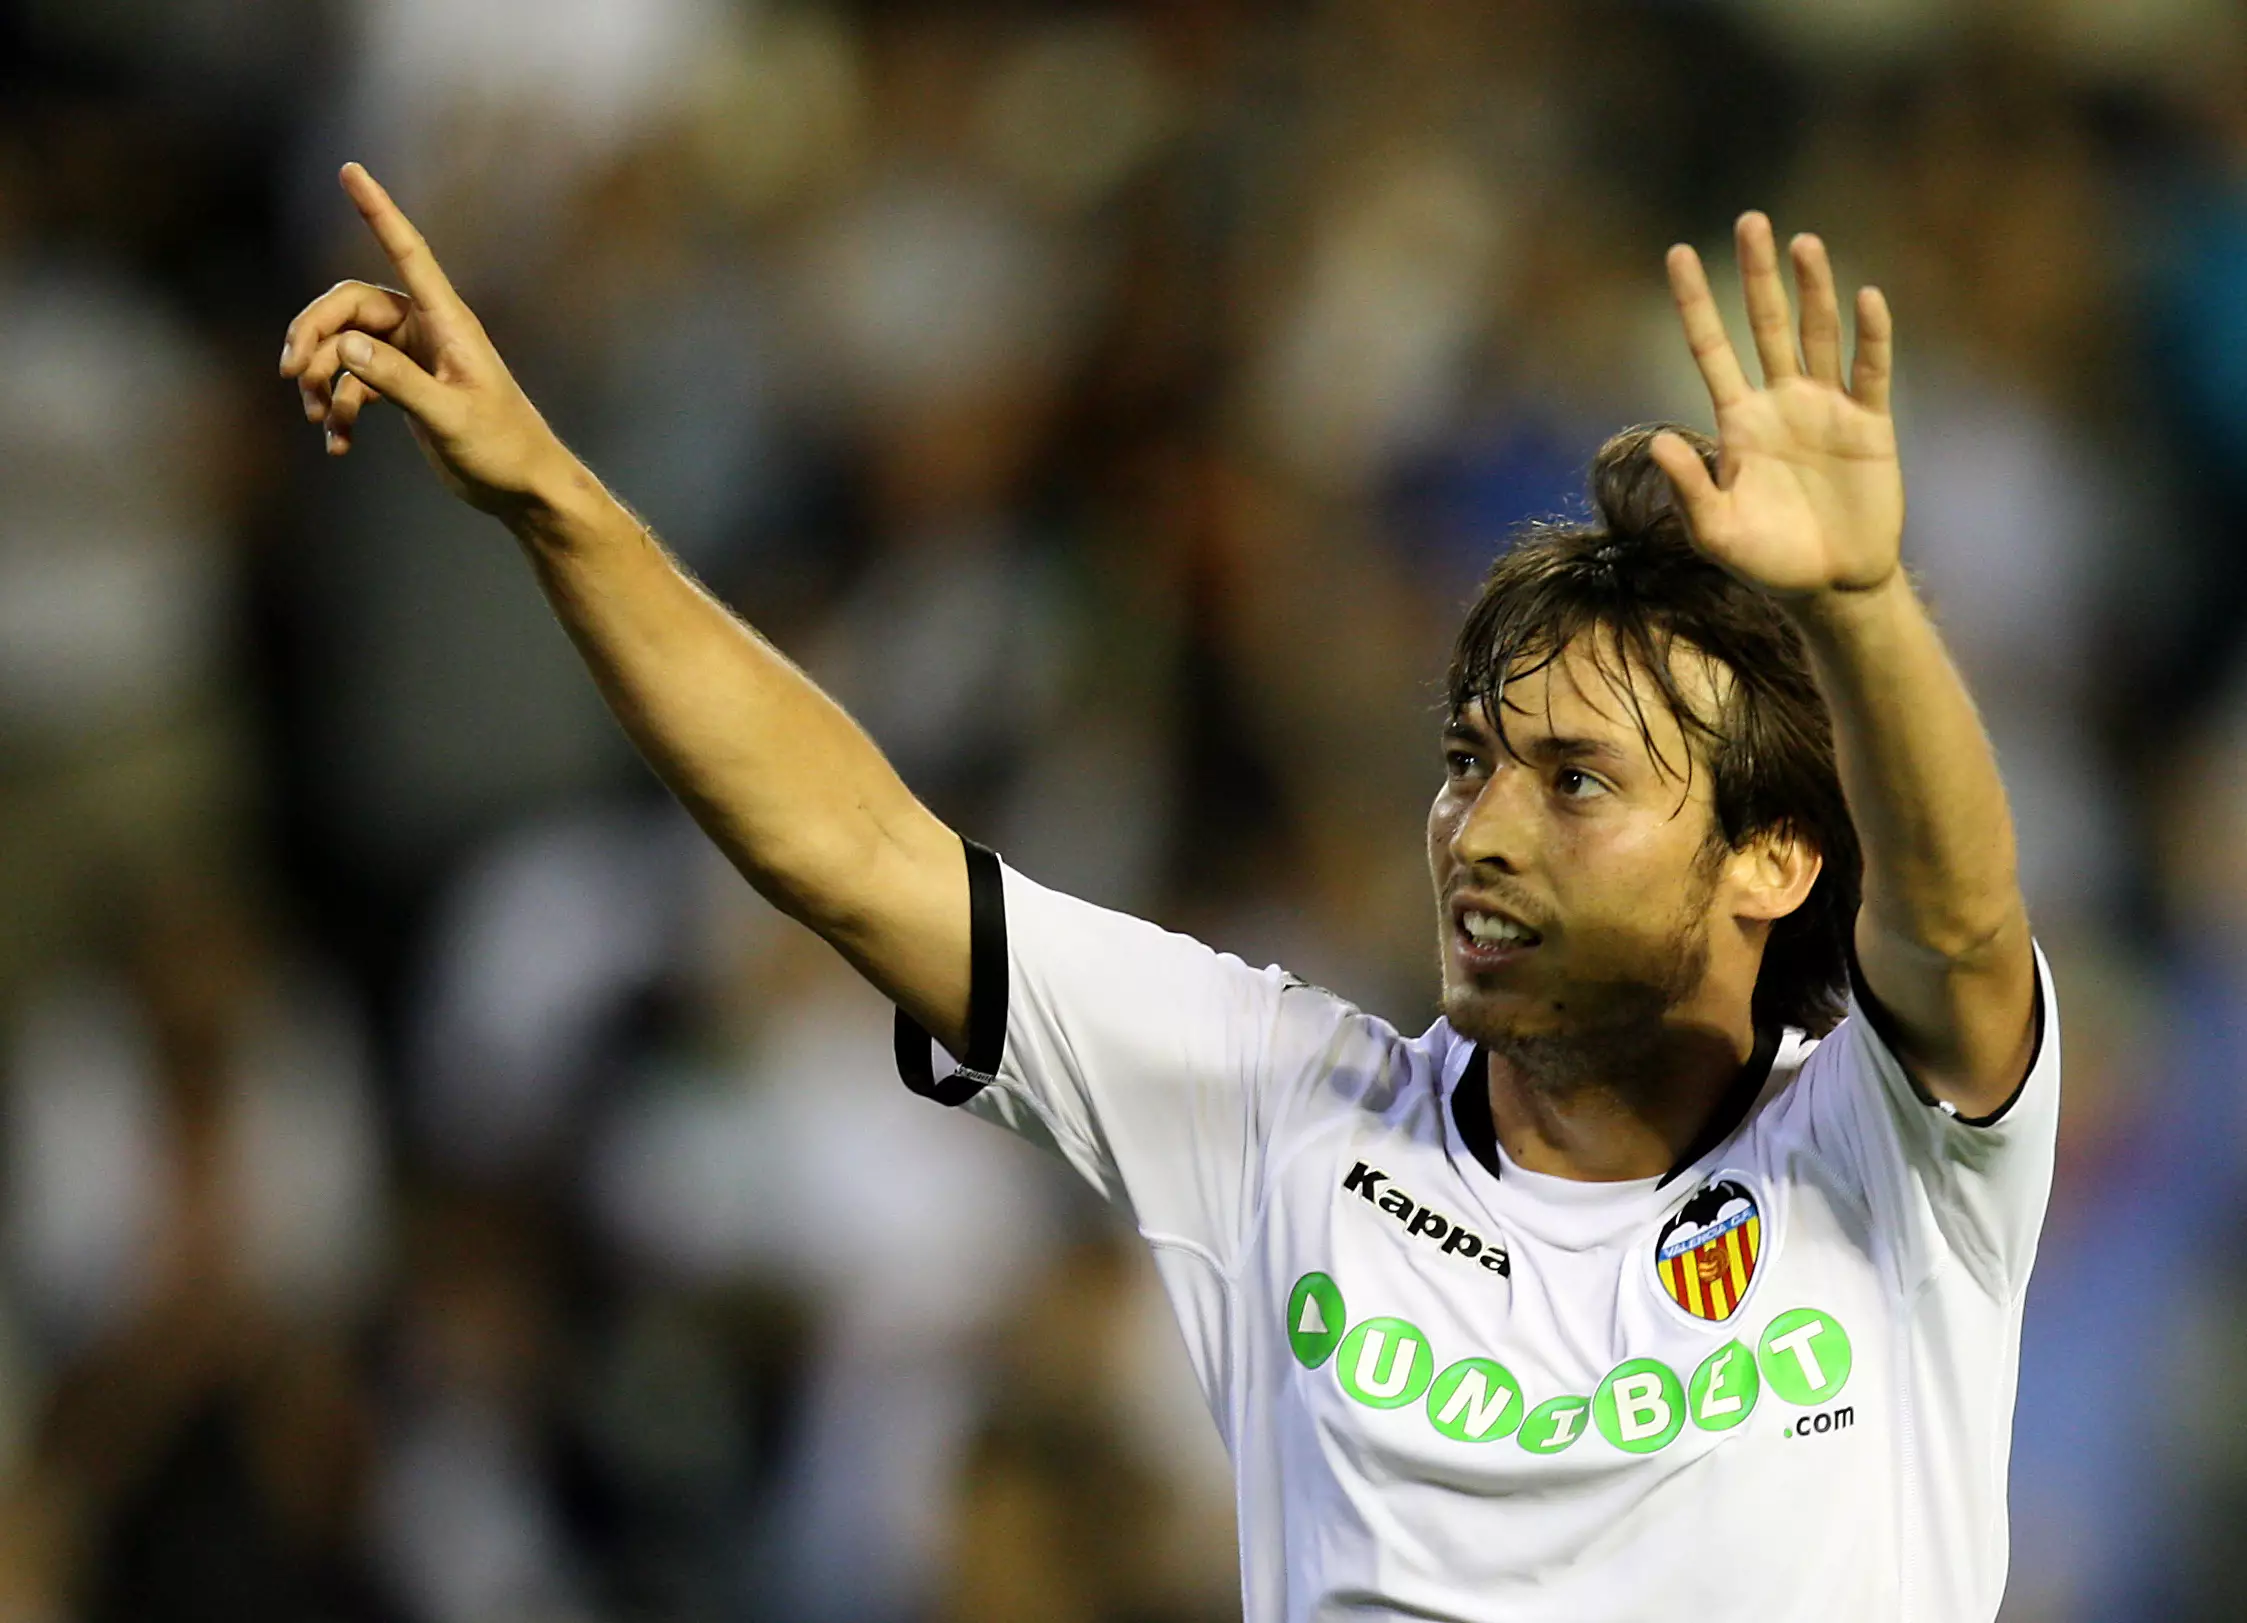 Silva started his career at Valencia before moving to England. Image: PA Images